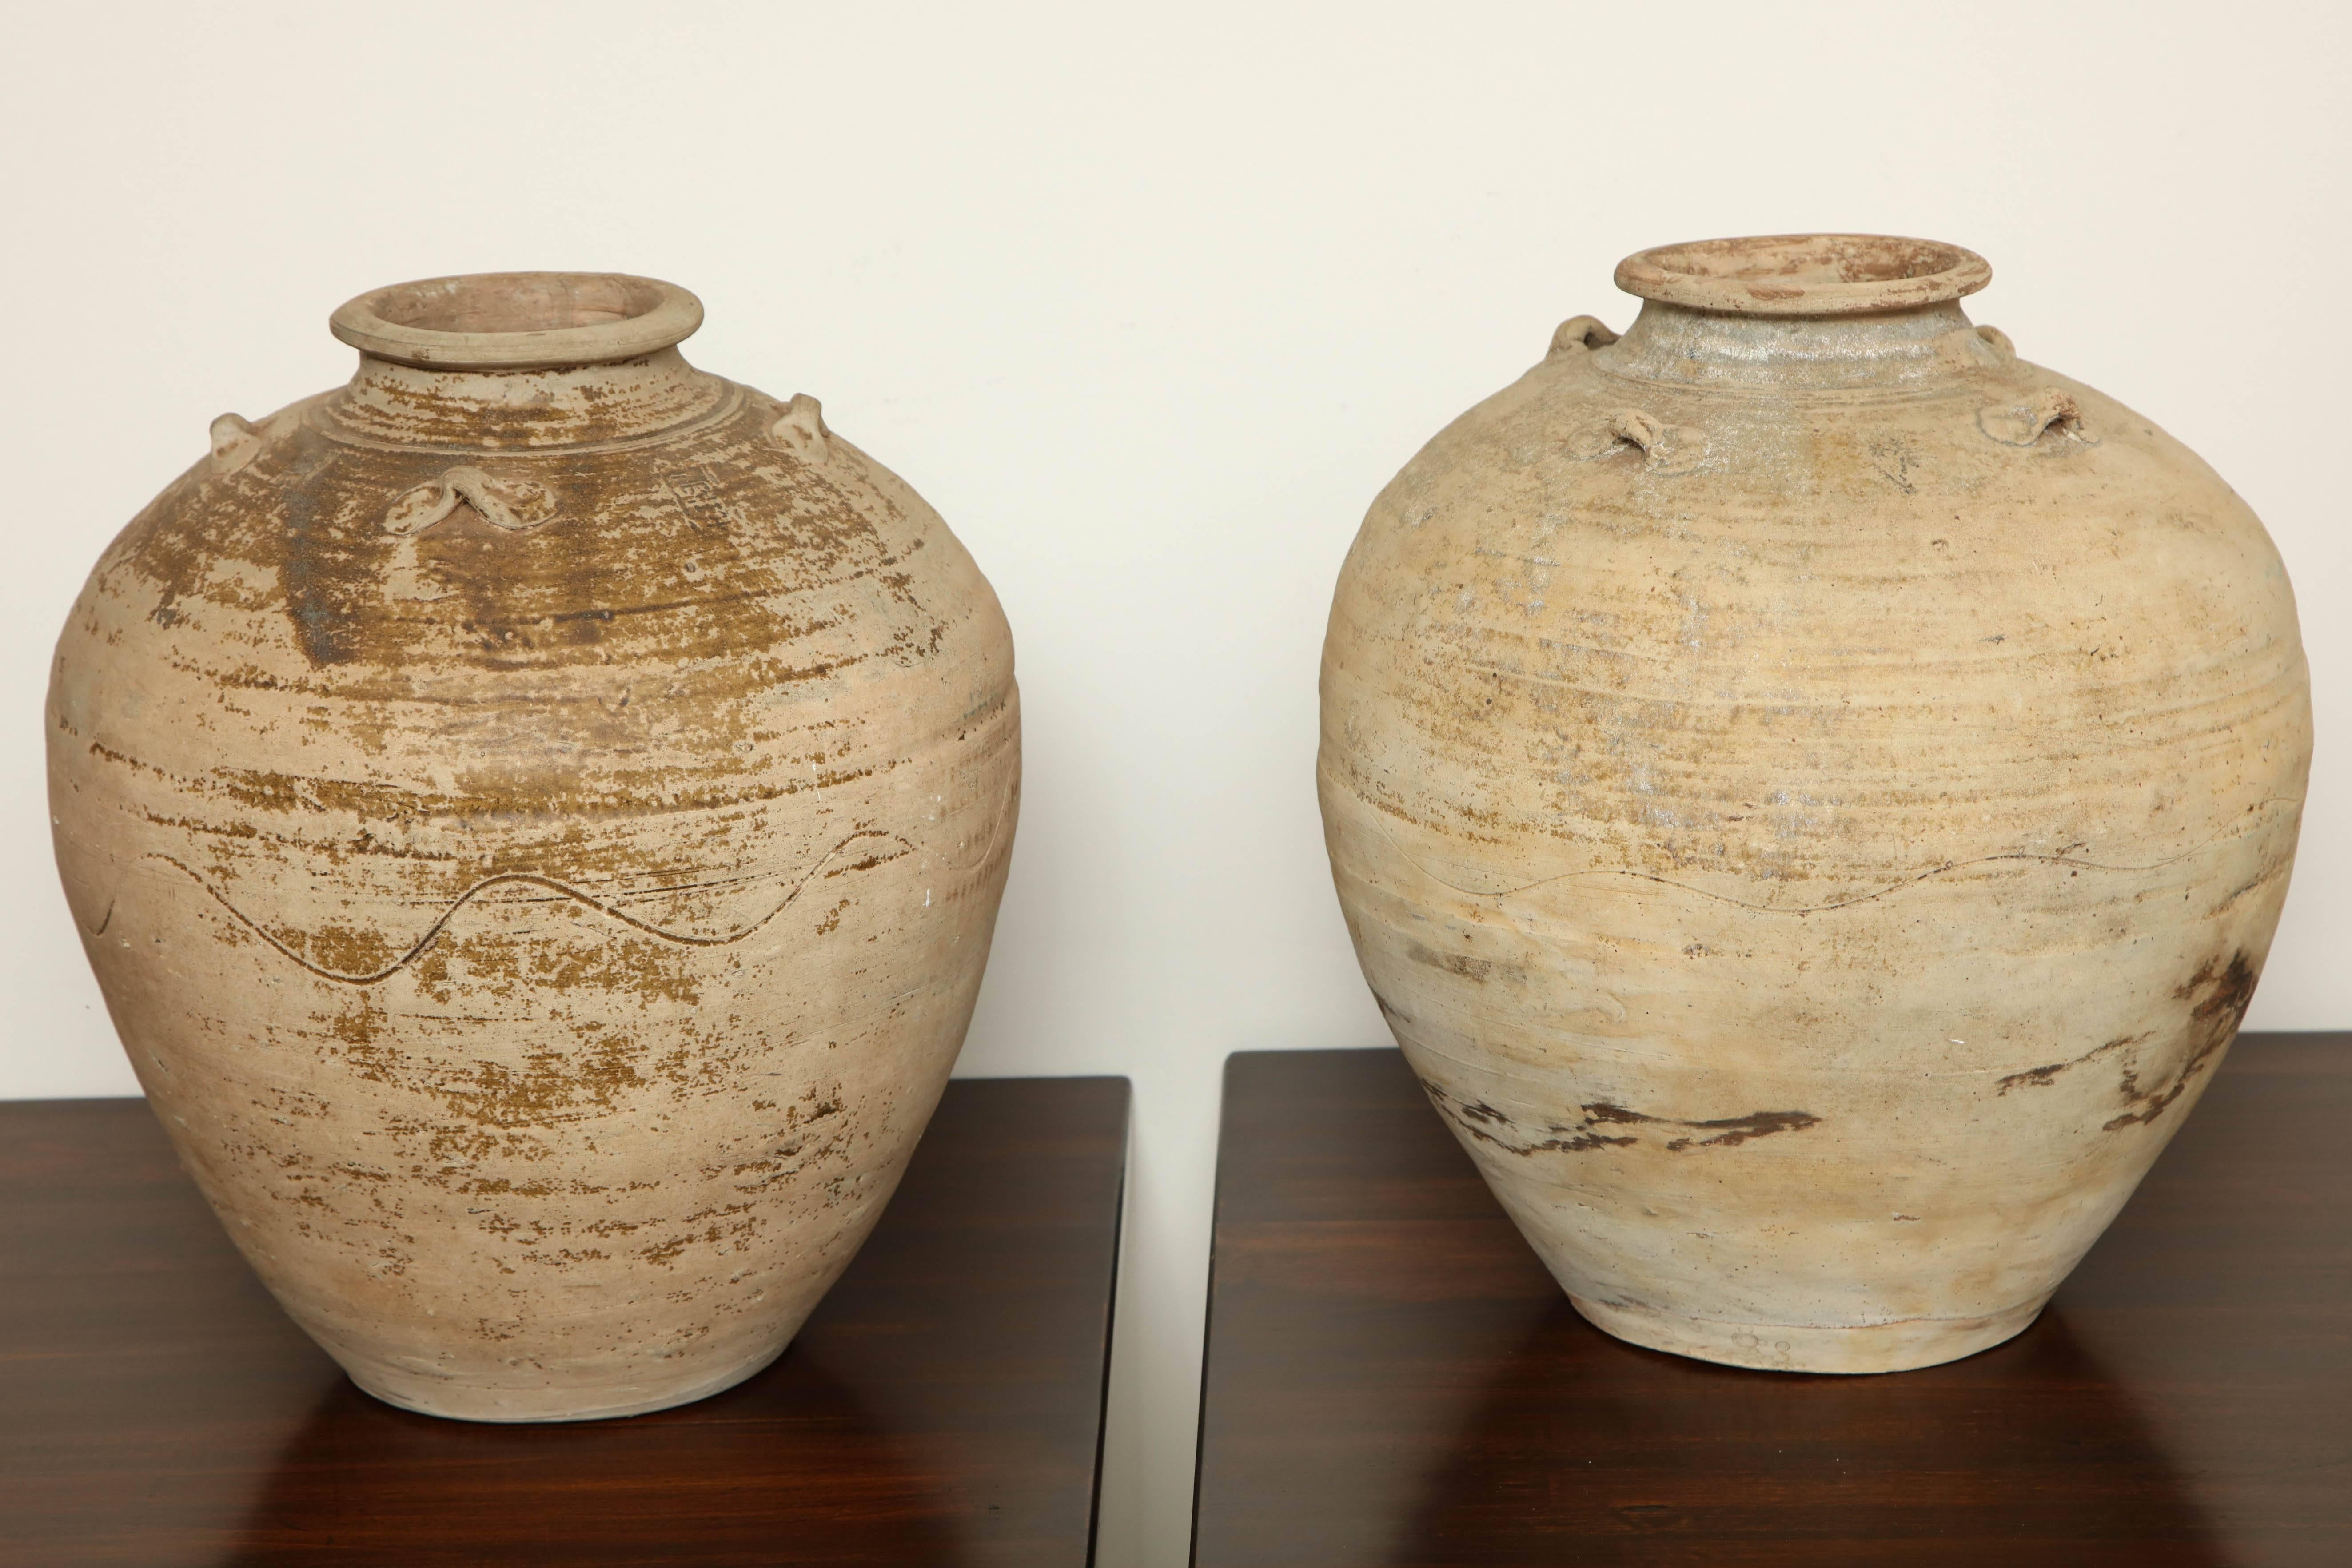 A spectacular pair of early 20th century terracotta vases, made in Indonesia.